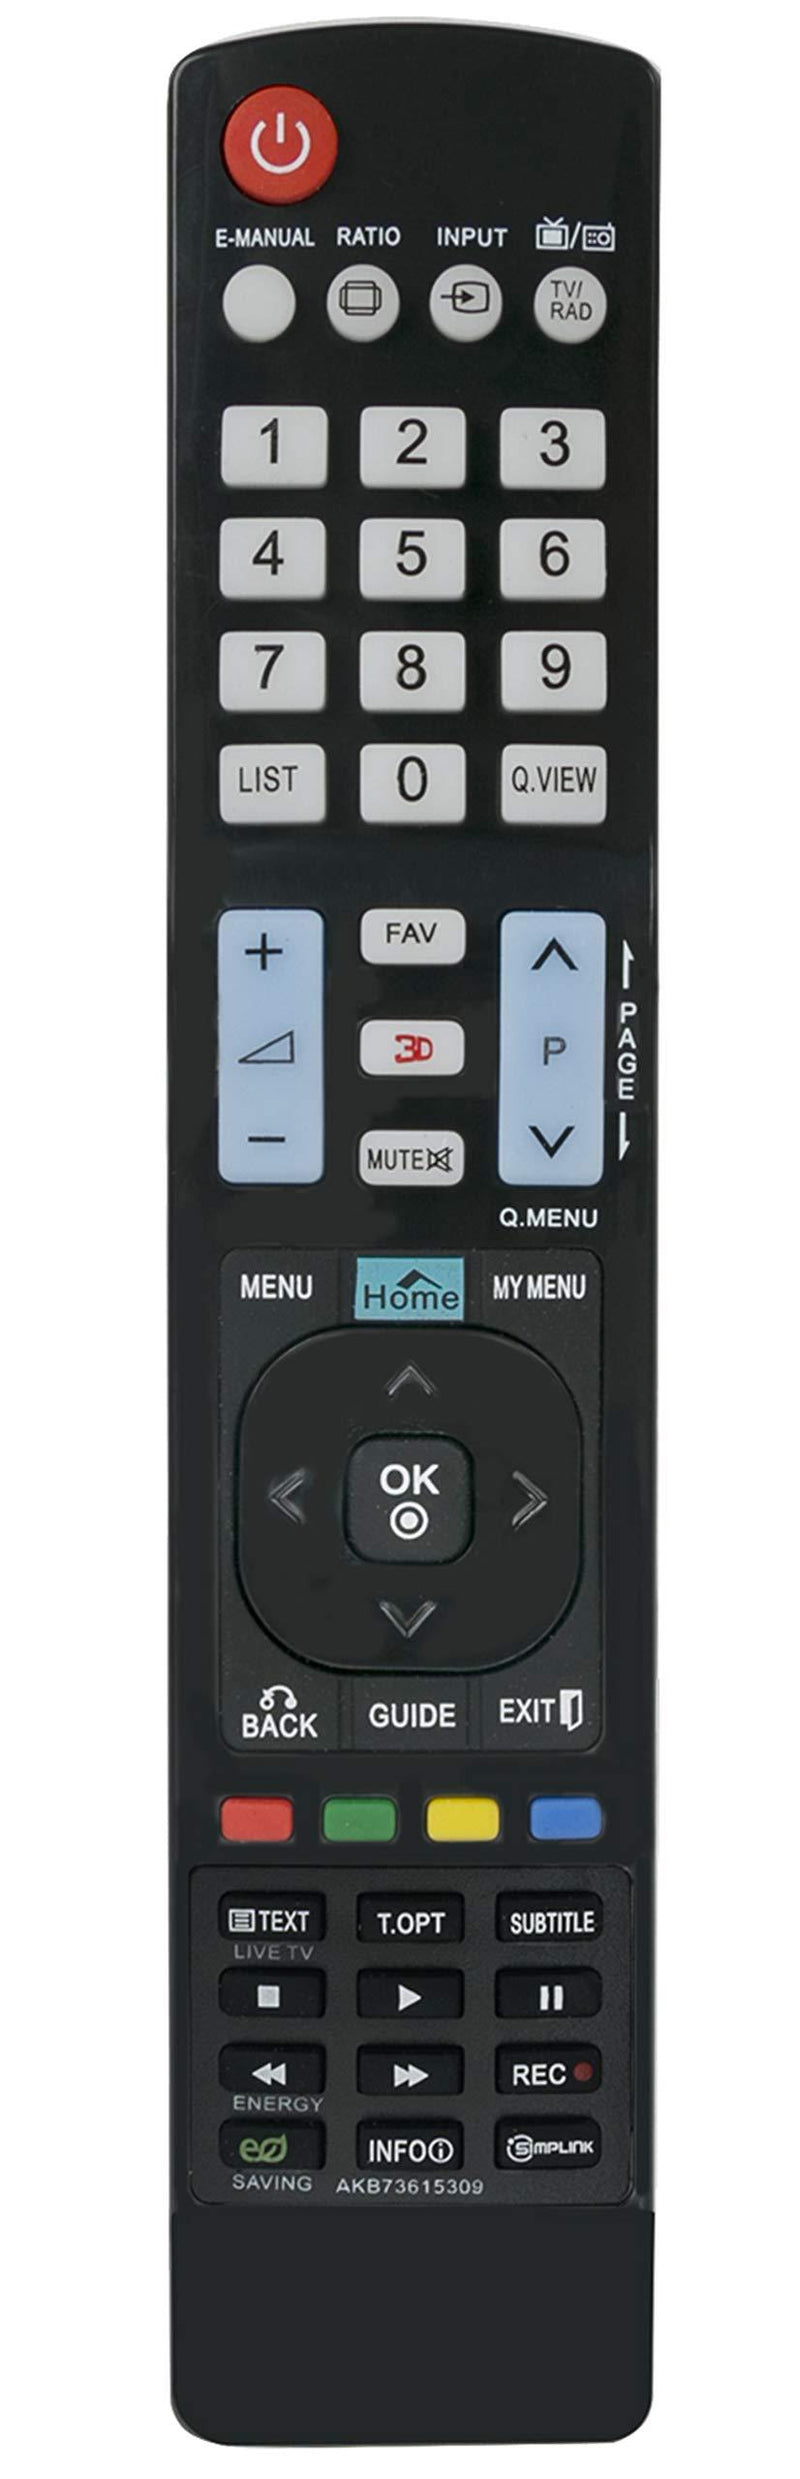 AKB73615309 Replaced Lost Remote Control fit for TV LG AKB73615309 AKB73615306 AKB73615309 32LM6200 32LM6400 32LM6410 42LM6200 42LM6410 42LM6700 42LM7600 - LeoForward Australia